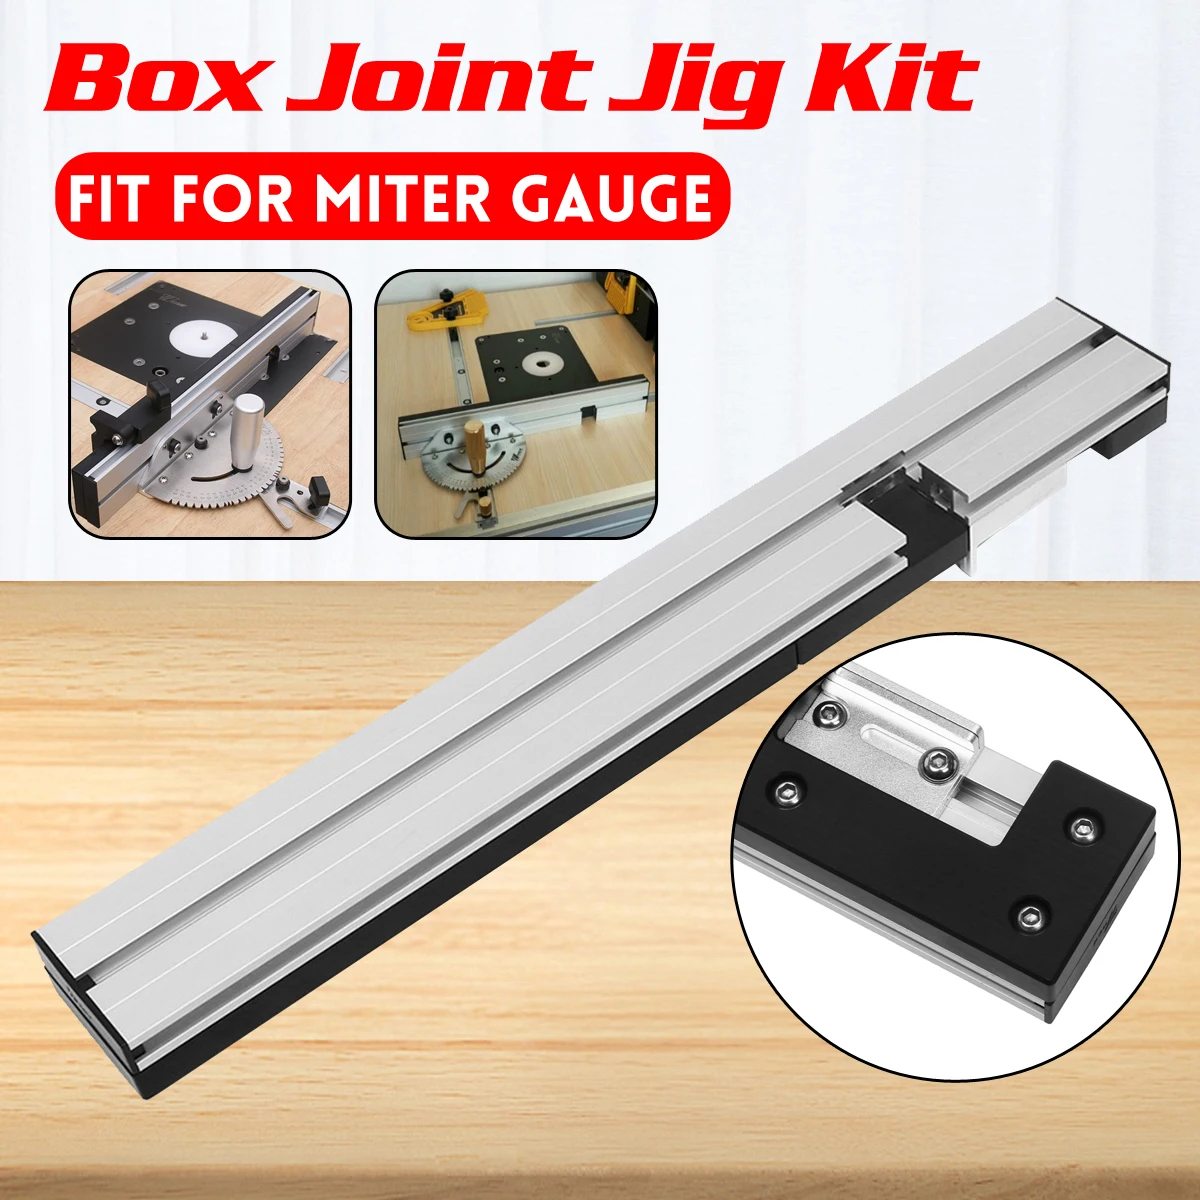 

450mm Aluminum Box Joint Jig Table Saw/Router Miter Gauge Sawing Assembly Ruler Kit For Miter Gauge Woodworking Tools